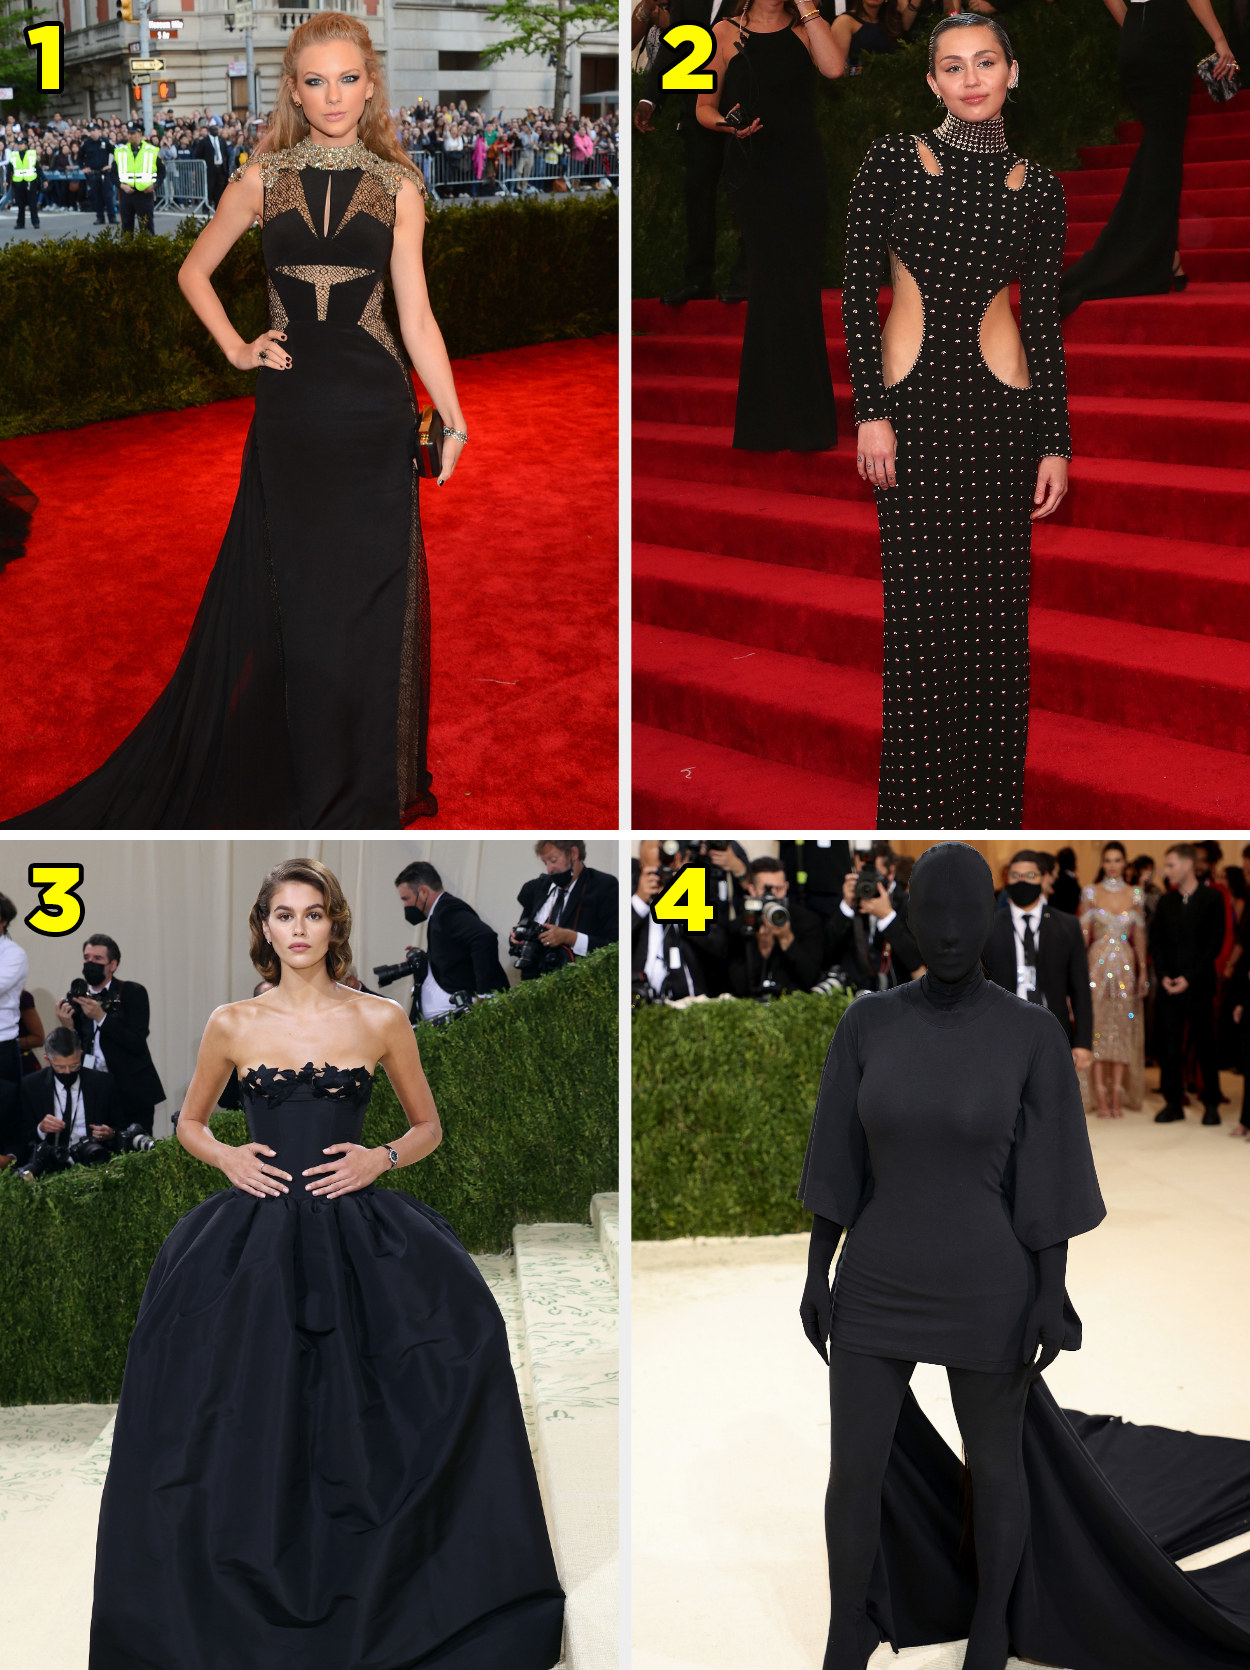 1. A long gown with sheer cutouts on the ribs and hips. 2. A long sleeved gown covered in studs. 3. A strapless ballgown. 4. A head to toe look totally covered in fabric so you can&#x27;t see the person&#x27;s face.